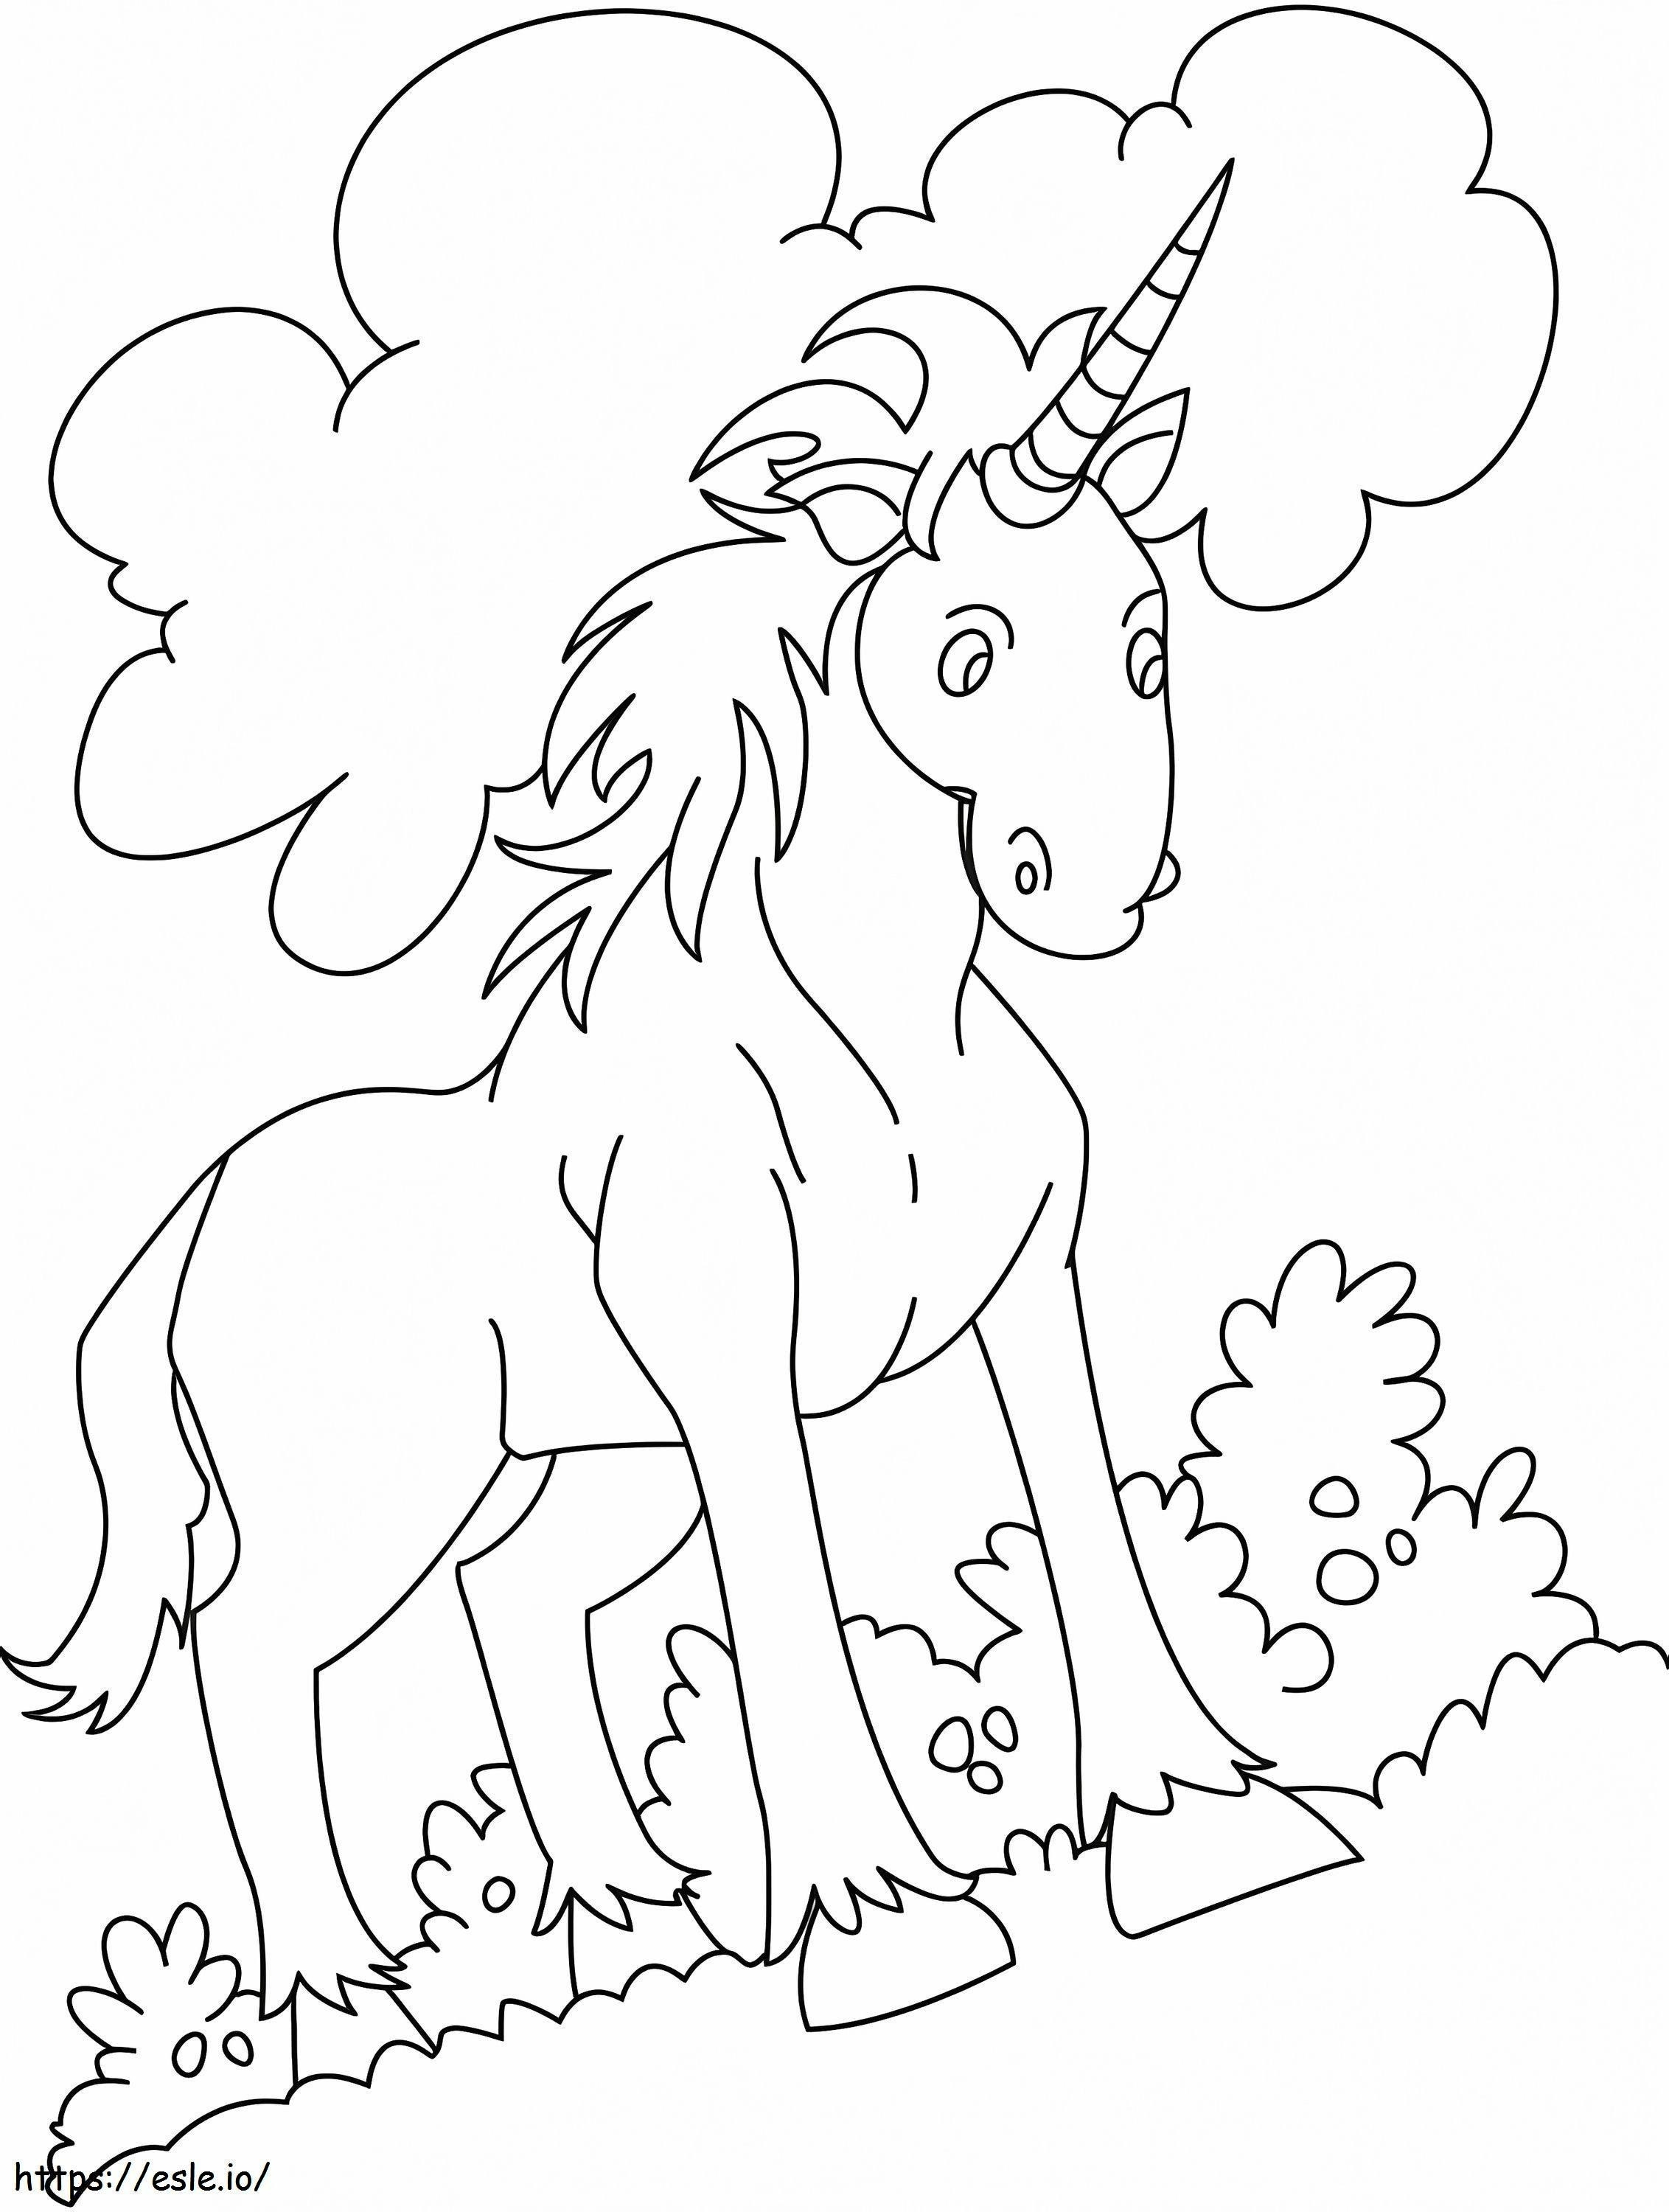 Adorable Unicorn 3 coloring page